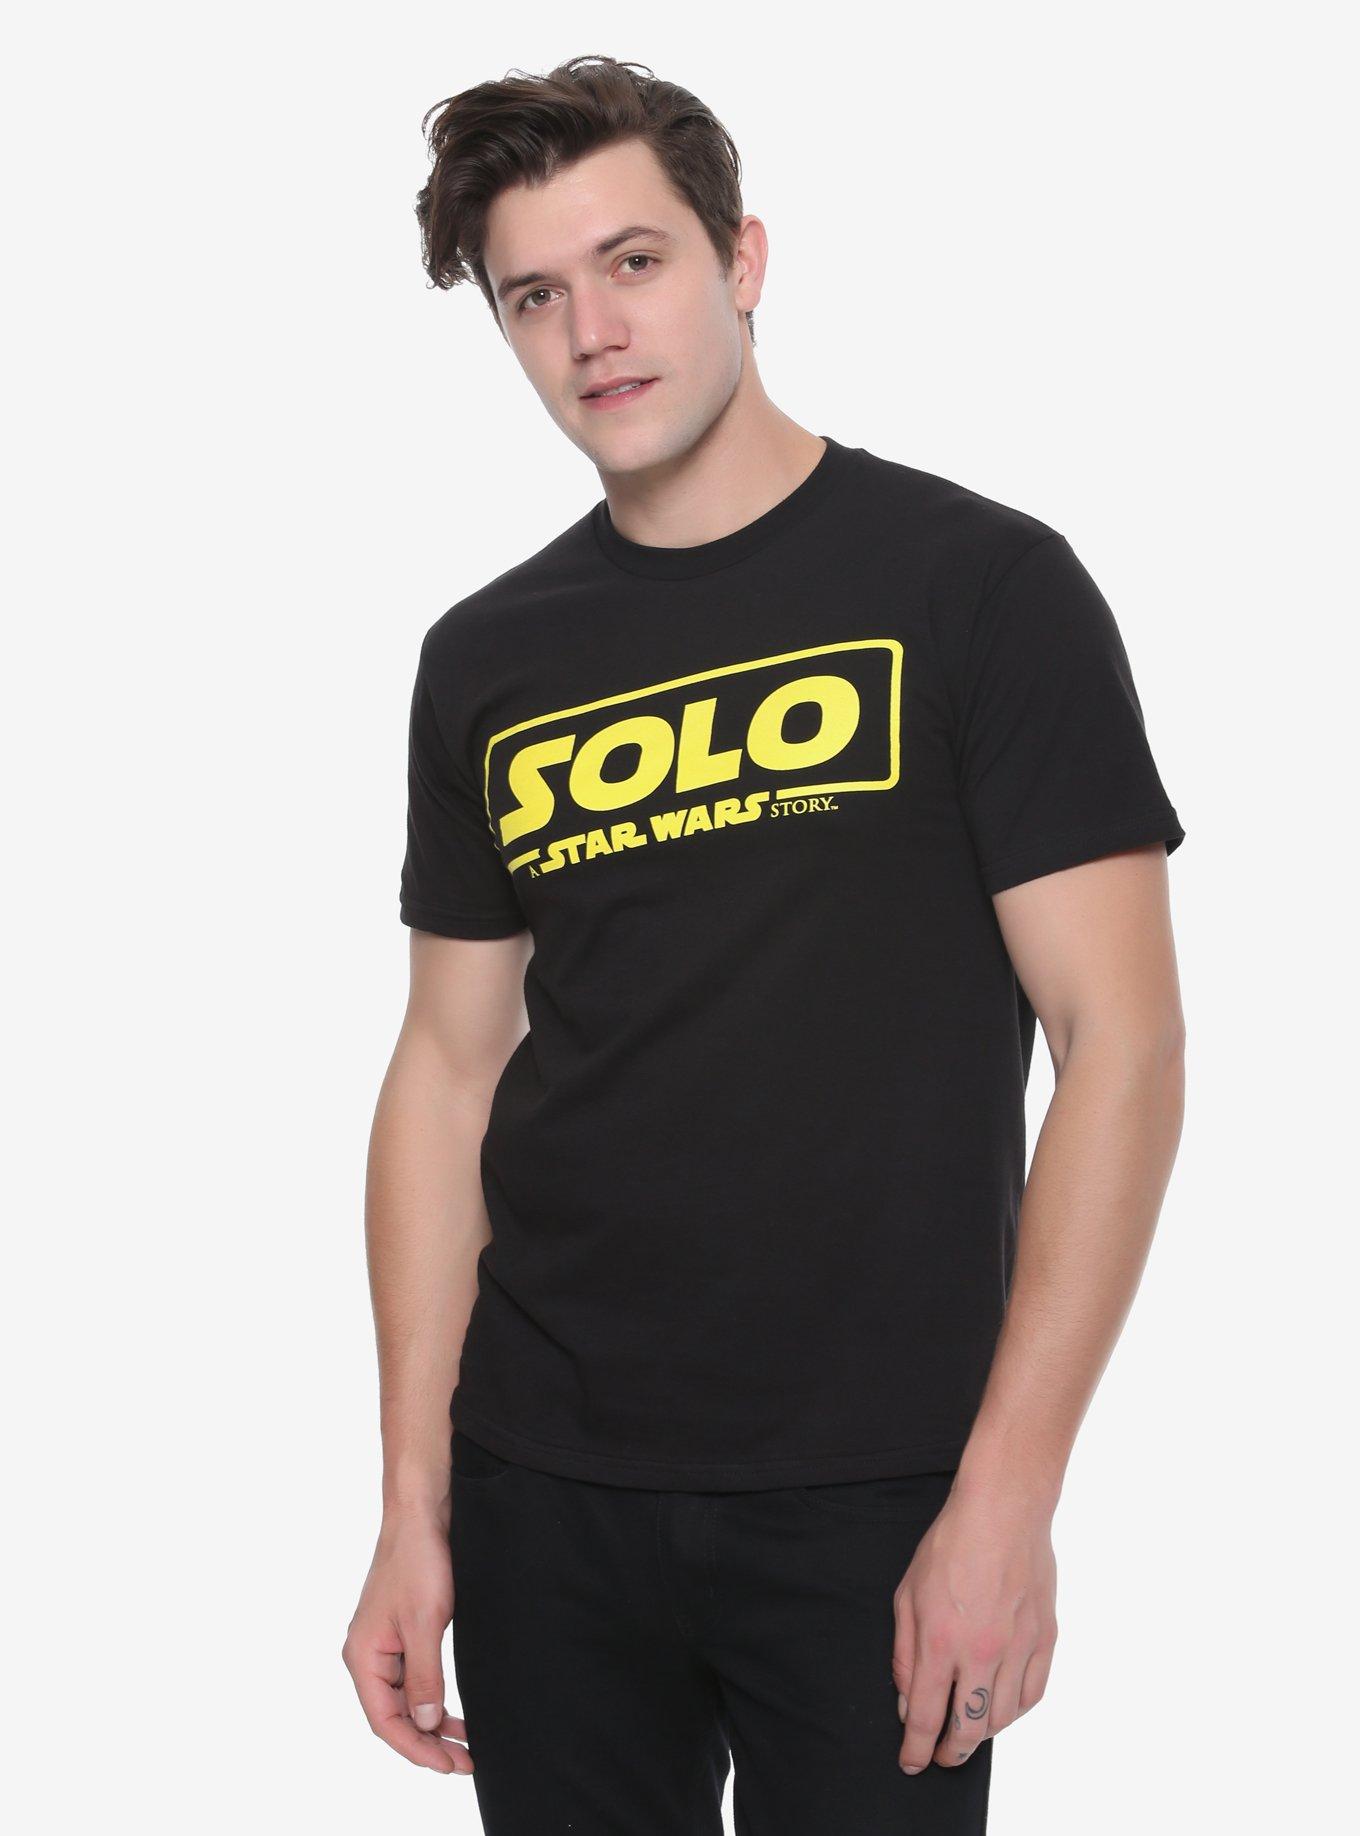 Solo: A Star Wars Story Title T-Shirt Hot Topic Exclusive, BLACK, alternate